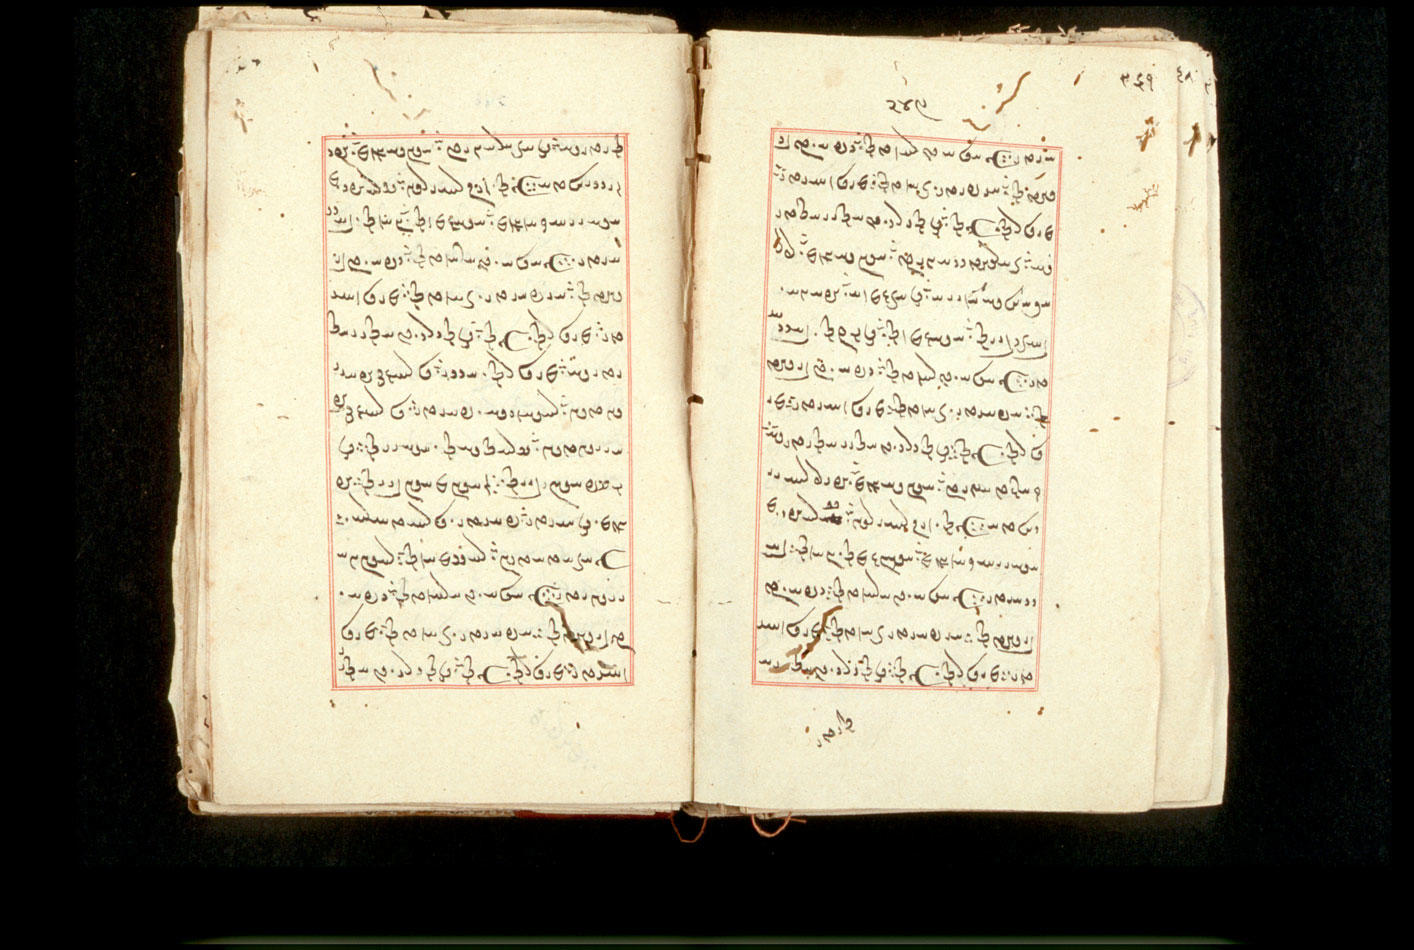 Folios 249v (right) and 250r (left)